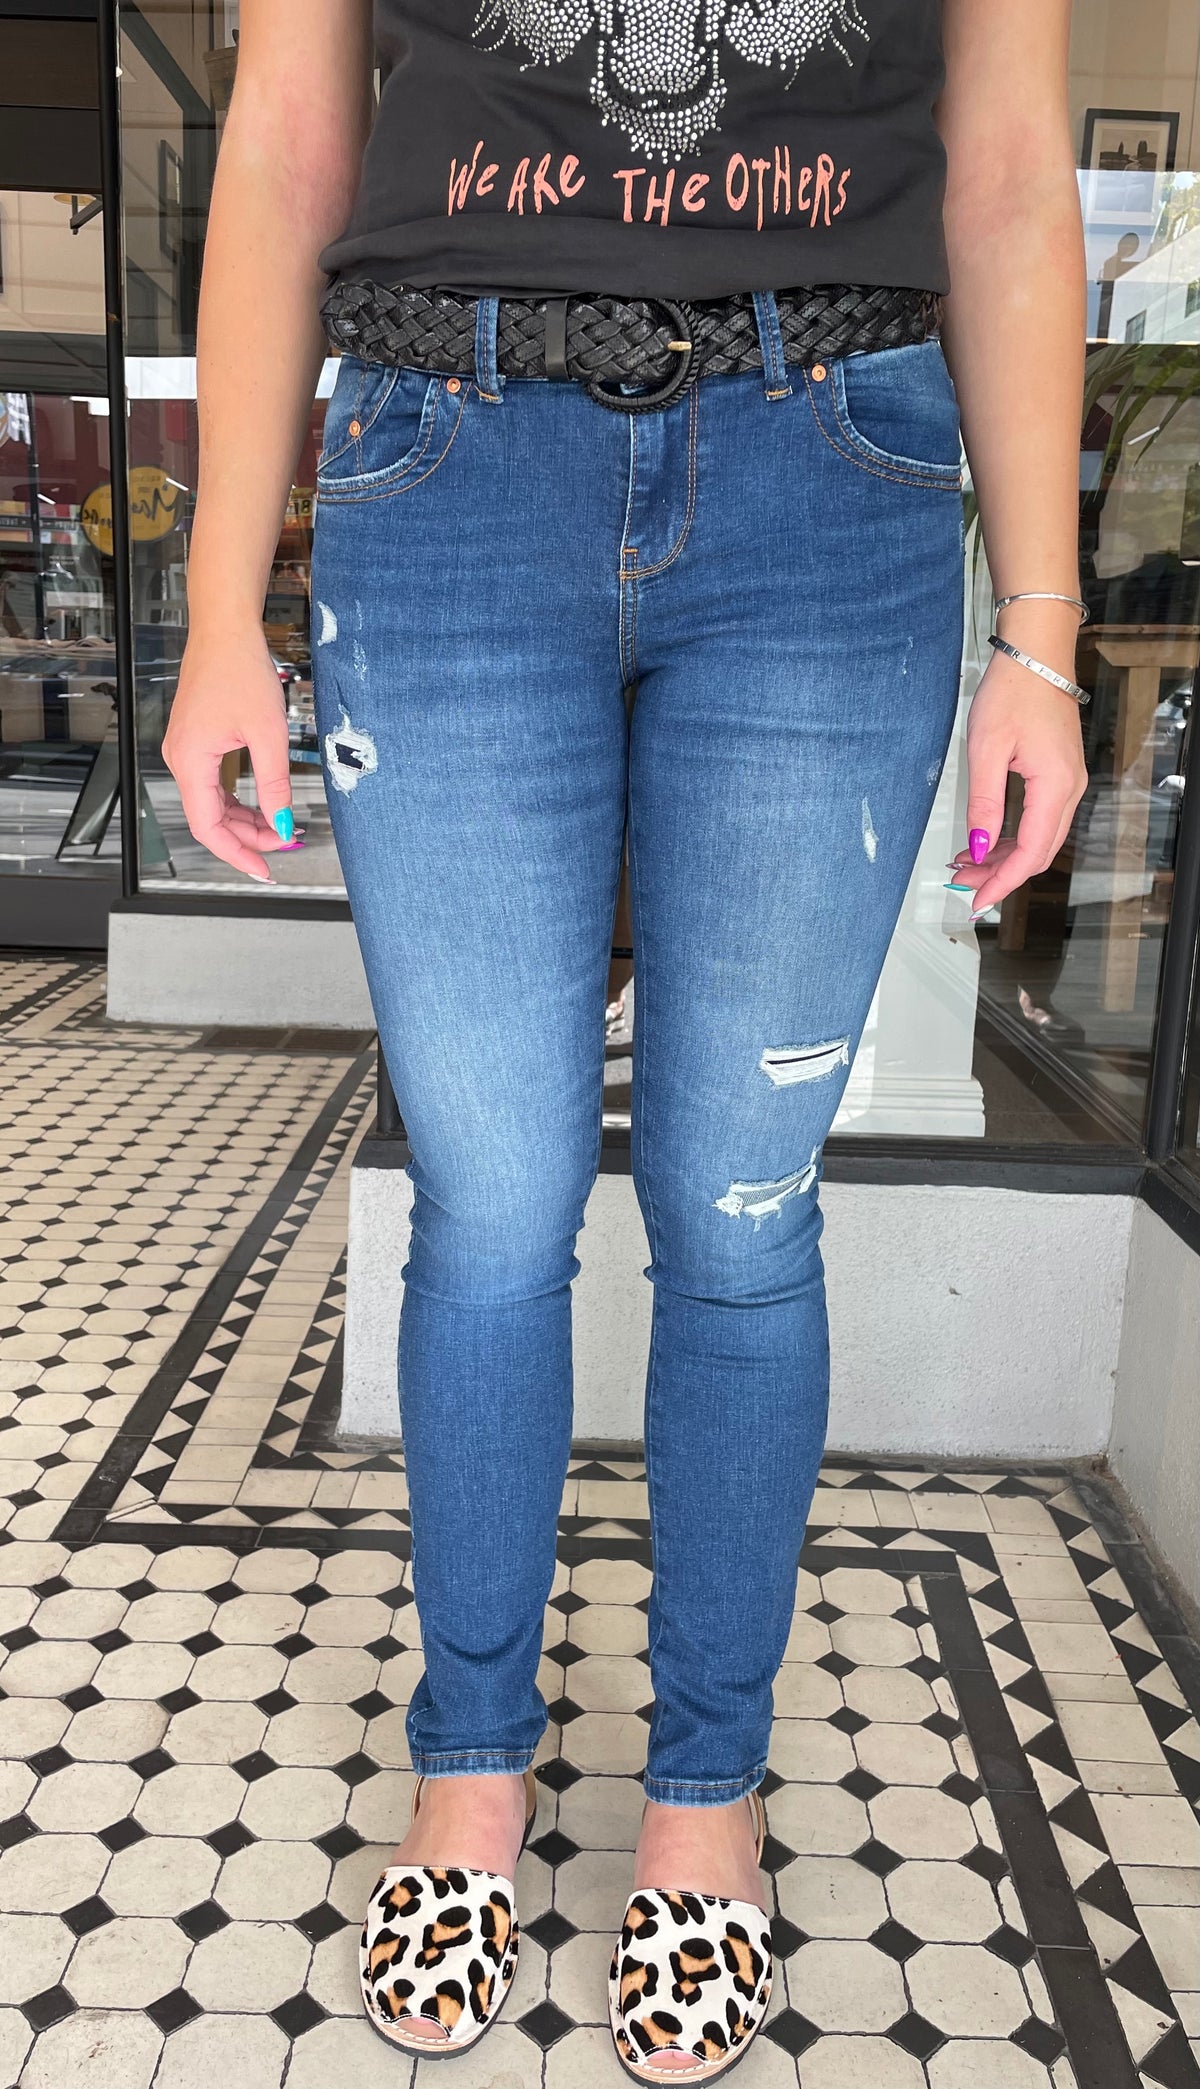 LTB Molly x Rosales High Waist Jeans